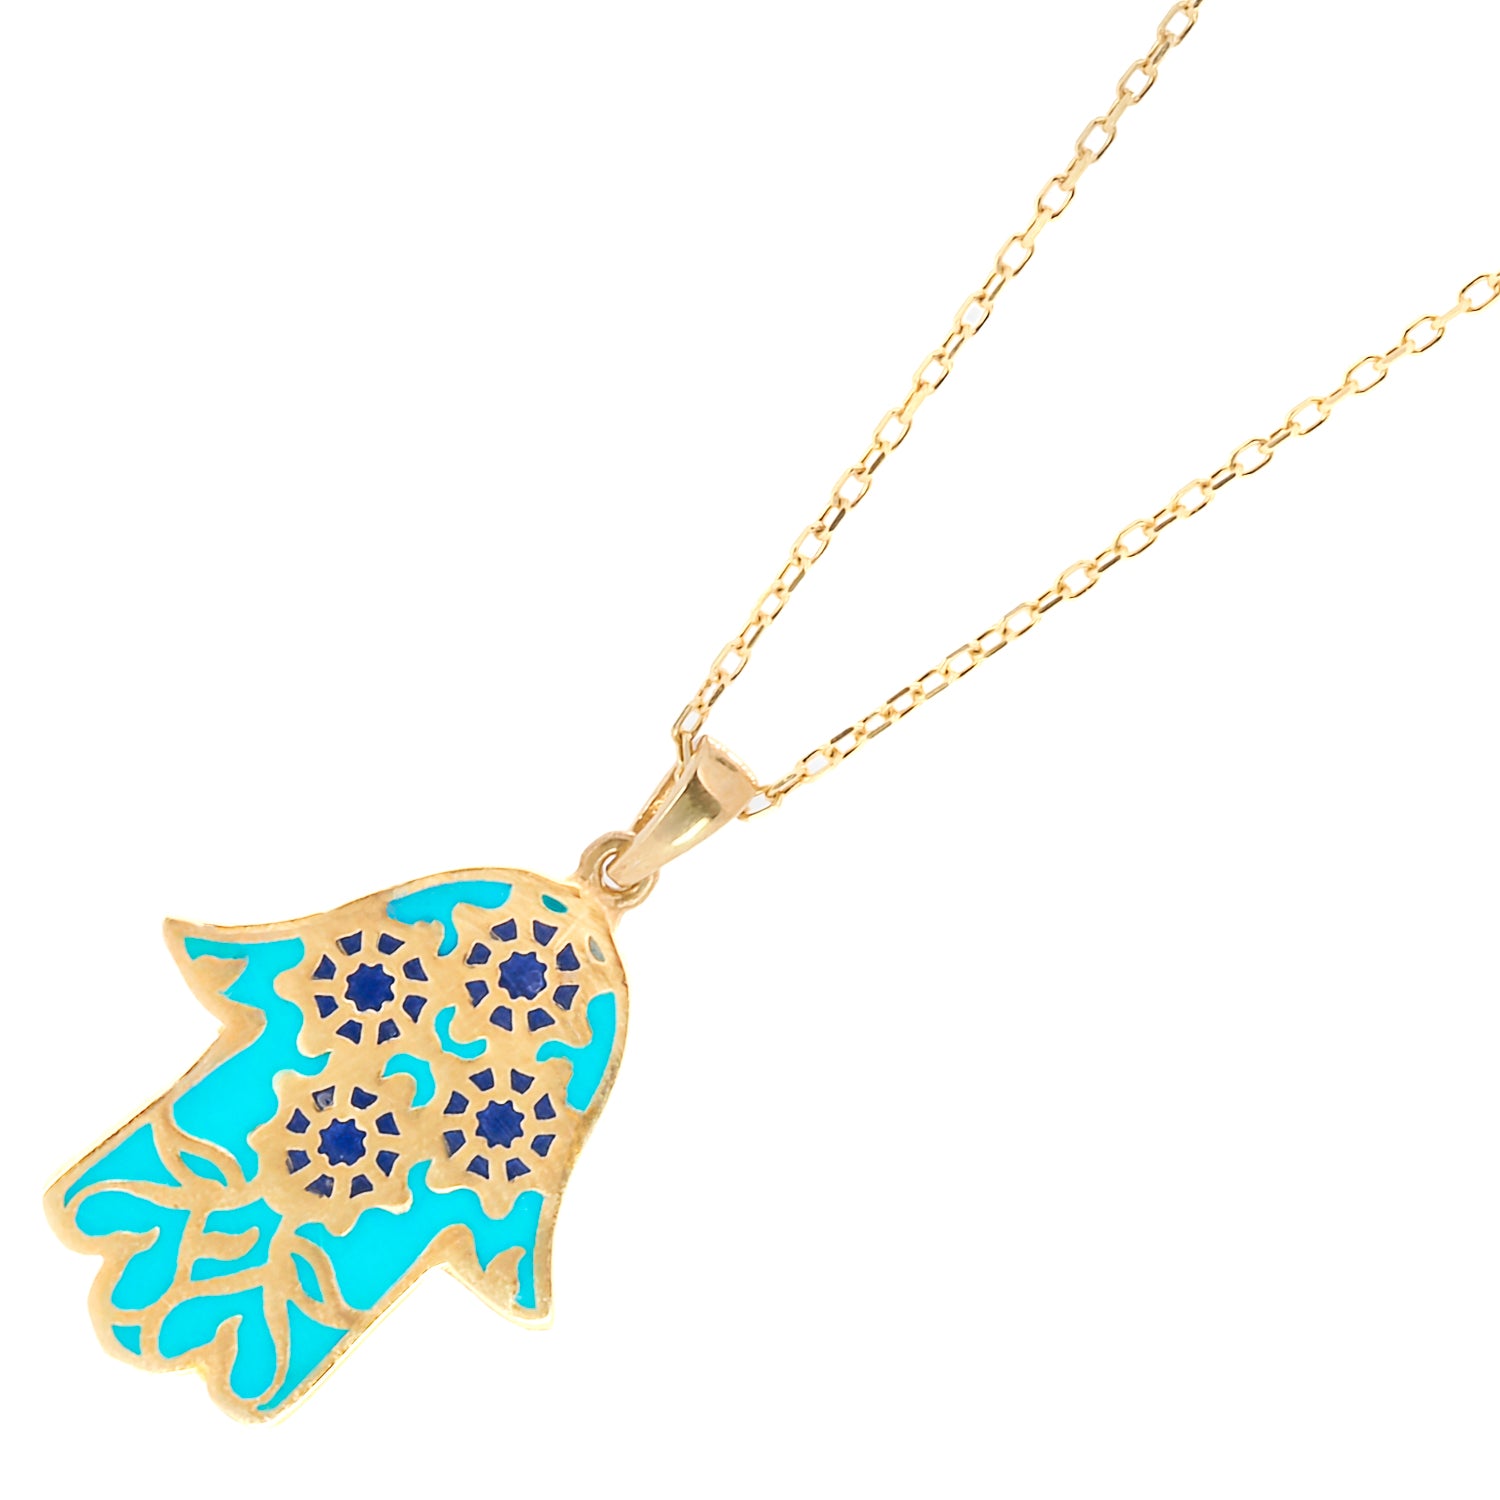 The sterling silver chain of the Good Vibes Enamel Hamsa Necklace, elegantly plated with 18k gold.